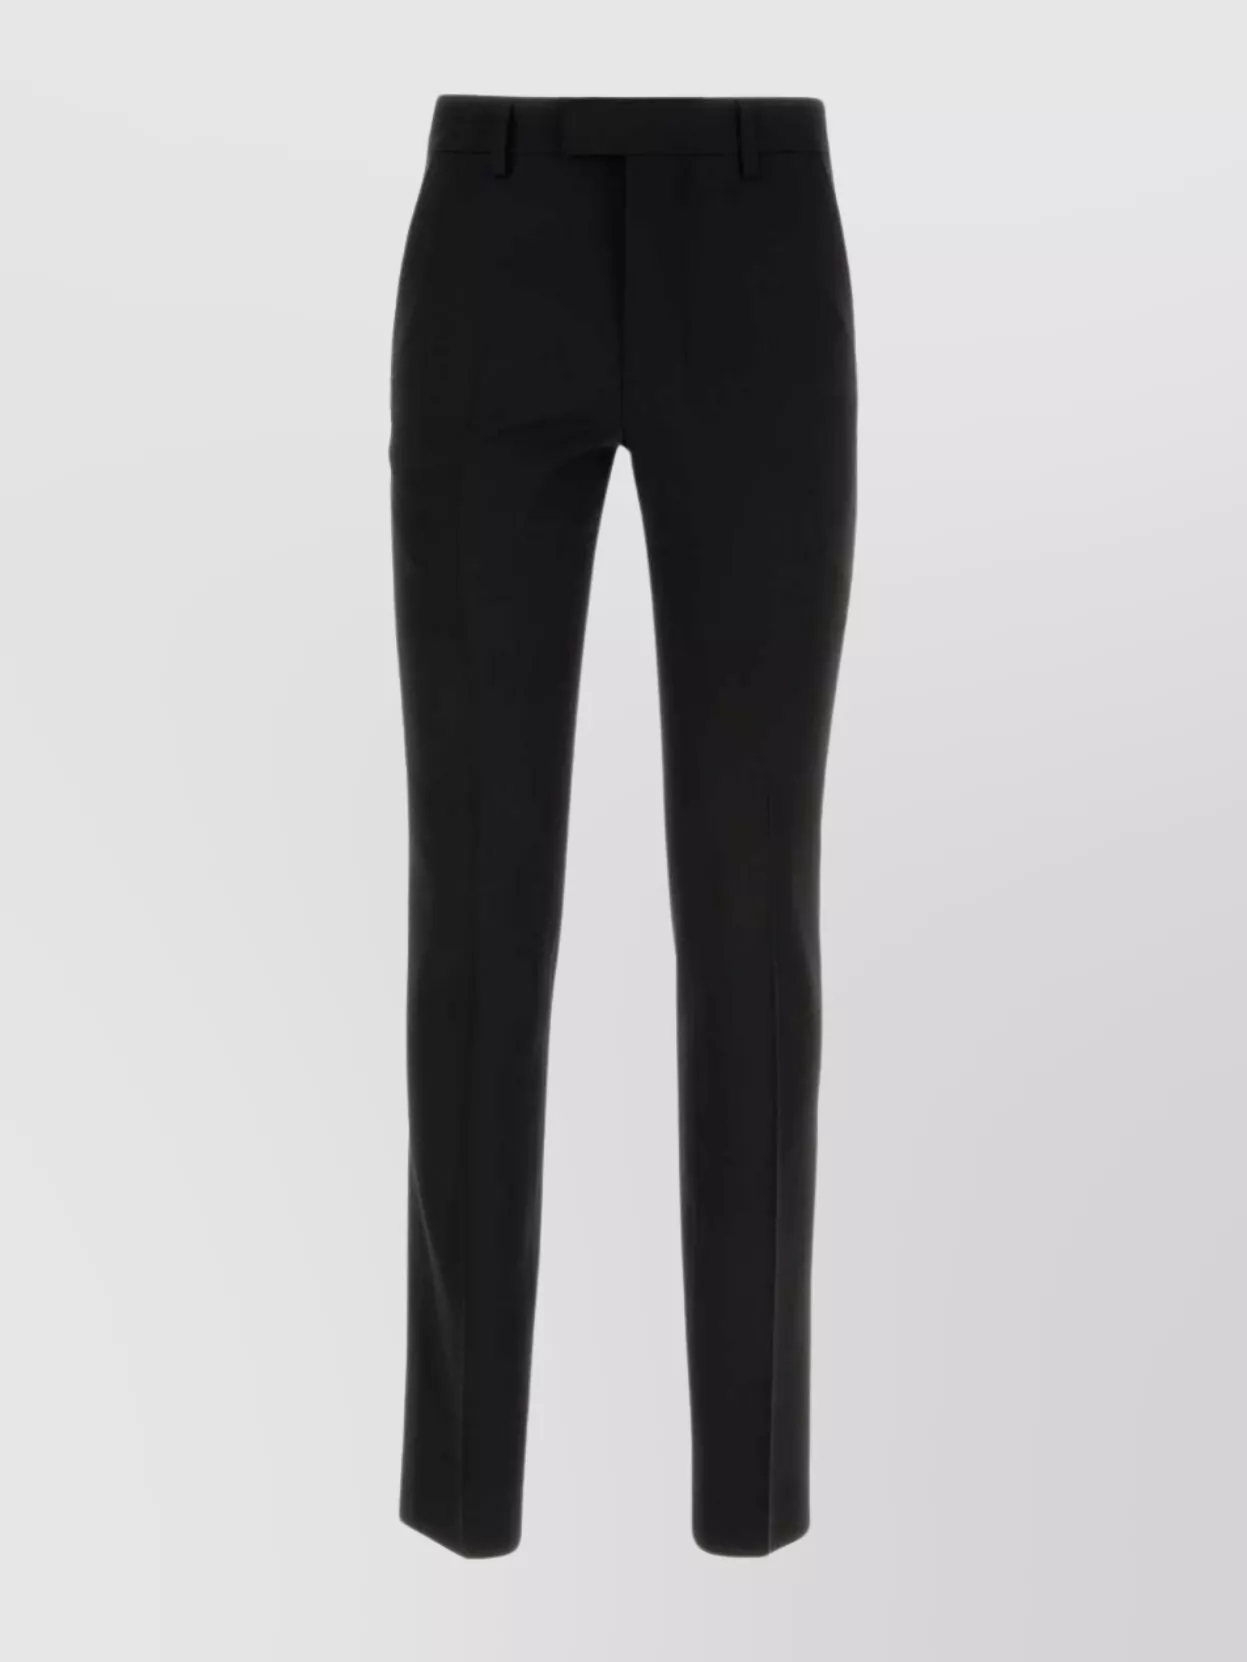 AMI ALEXANDRE MATTIUSSI VISCOSE BLEND PANT WITH BELT LOOPS AND BACK POCKETS